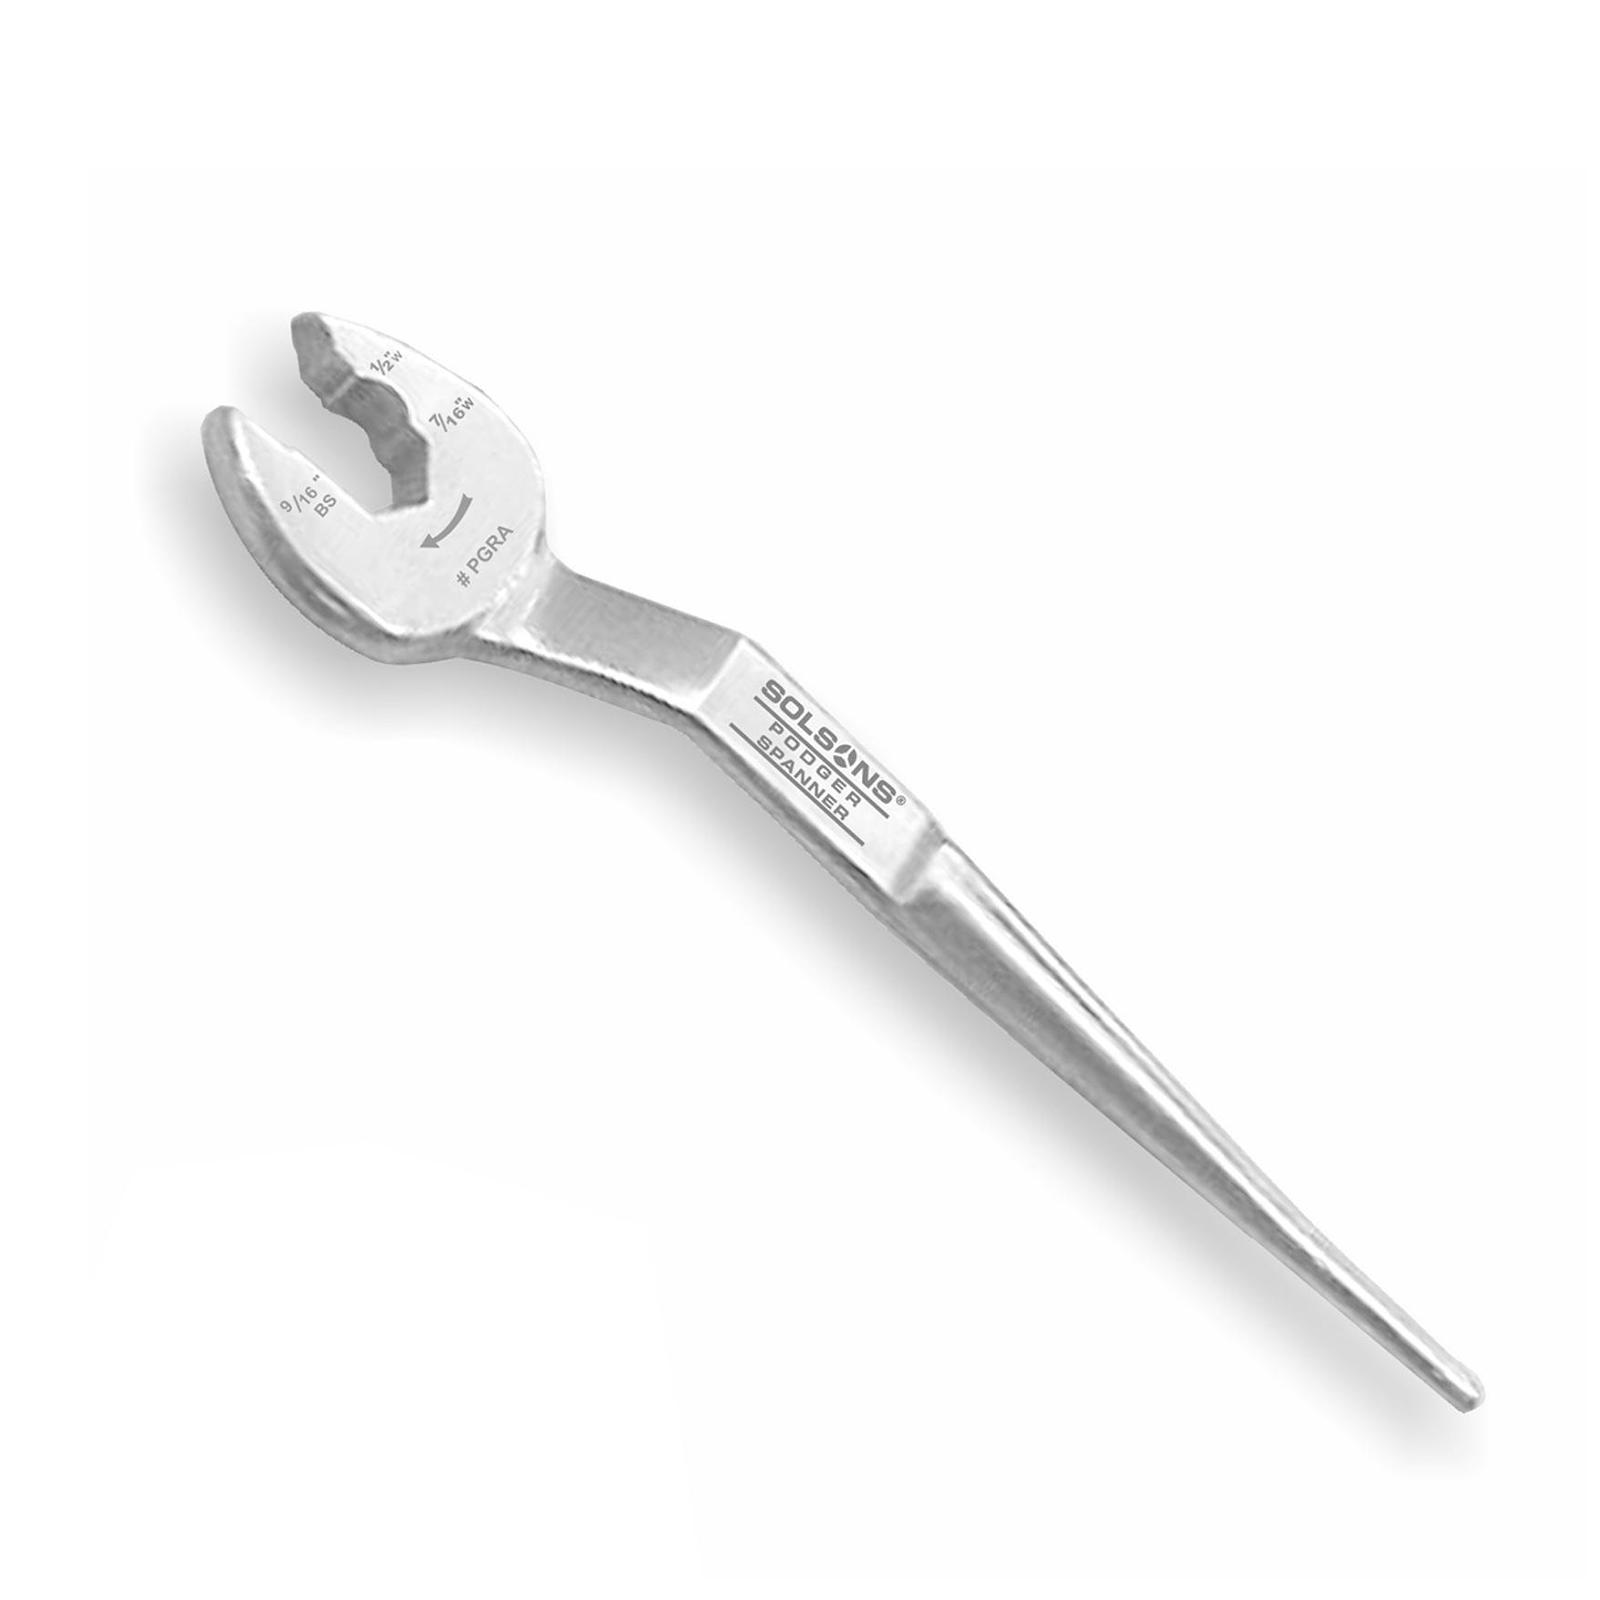 wright scaffold wrench brass